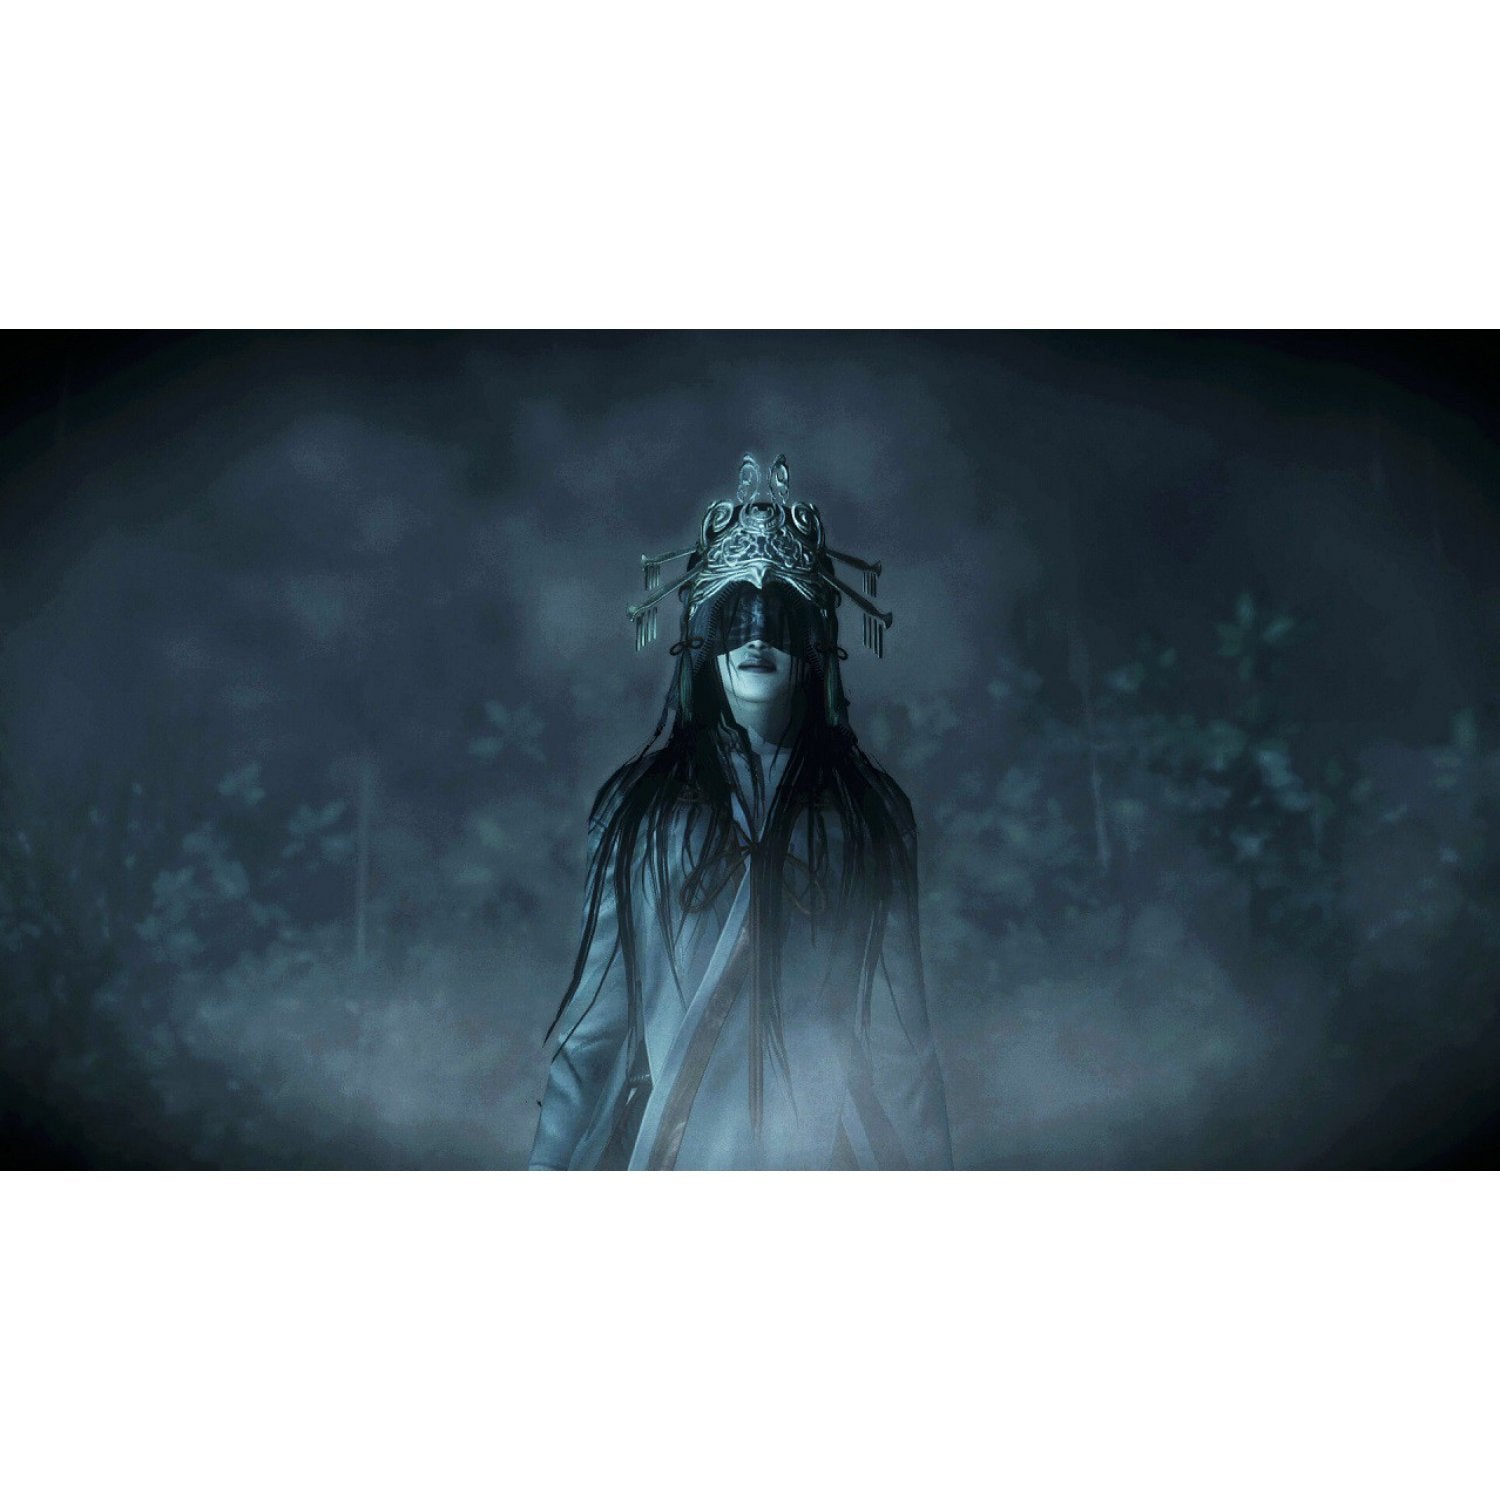 PS4 Fatal Frame: Maiden of Black Water (M18)